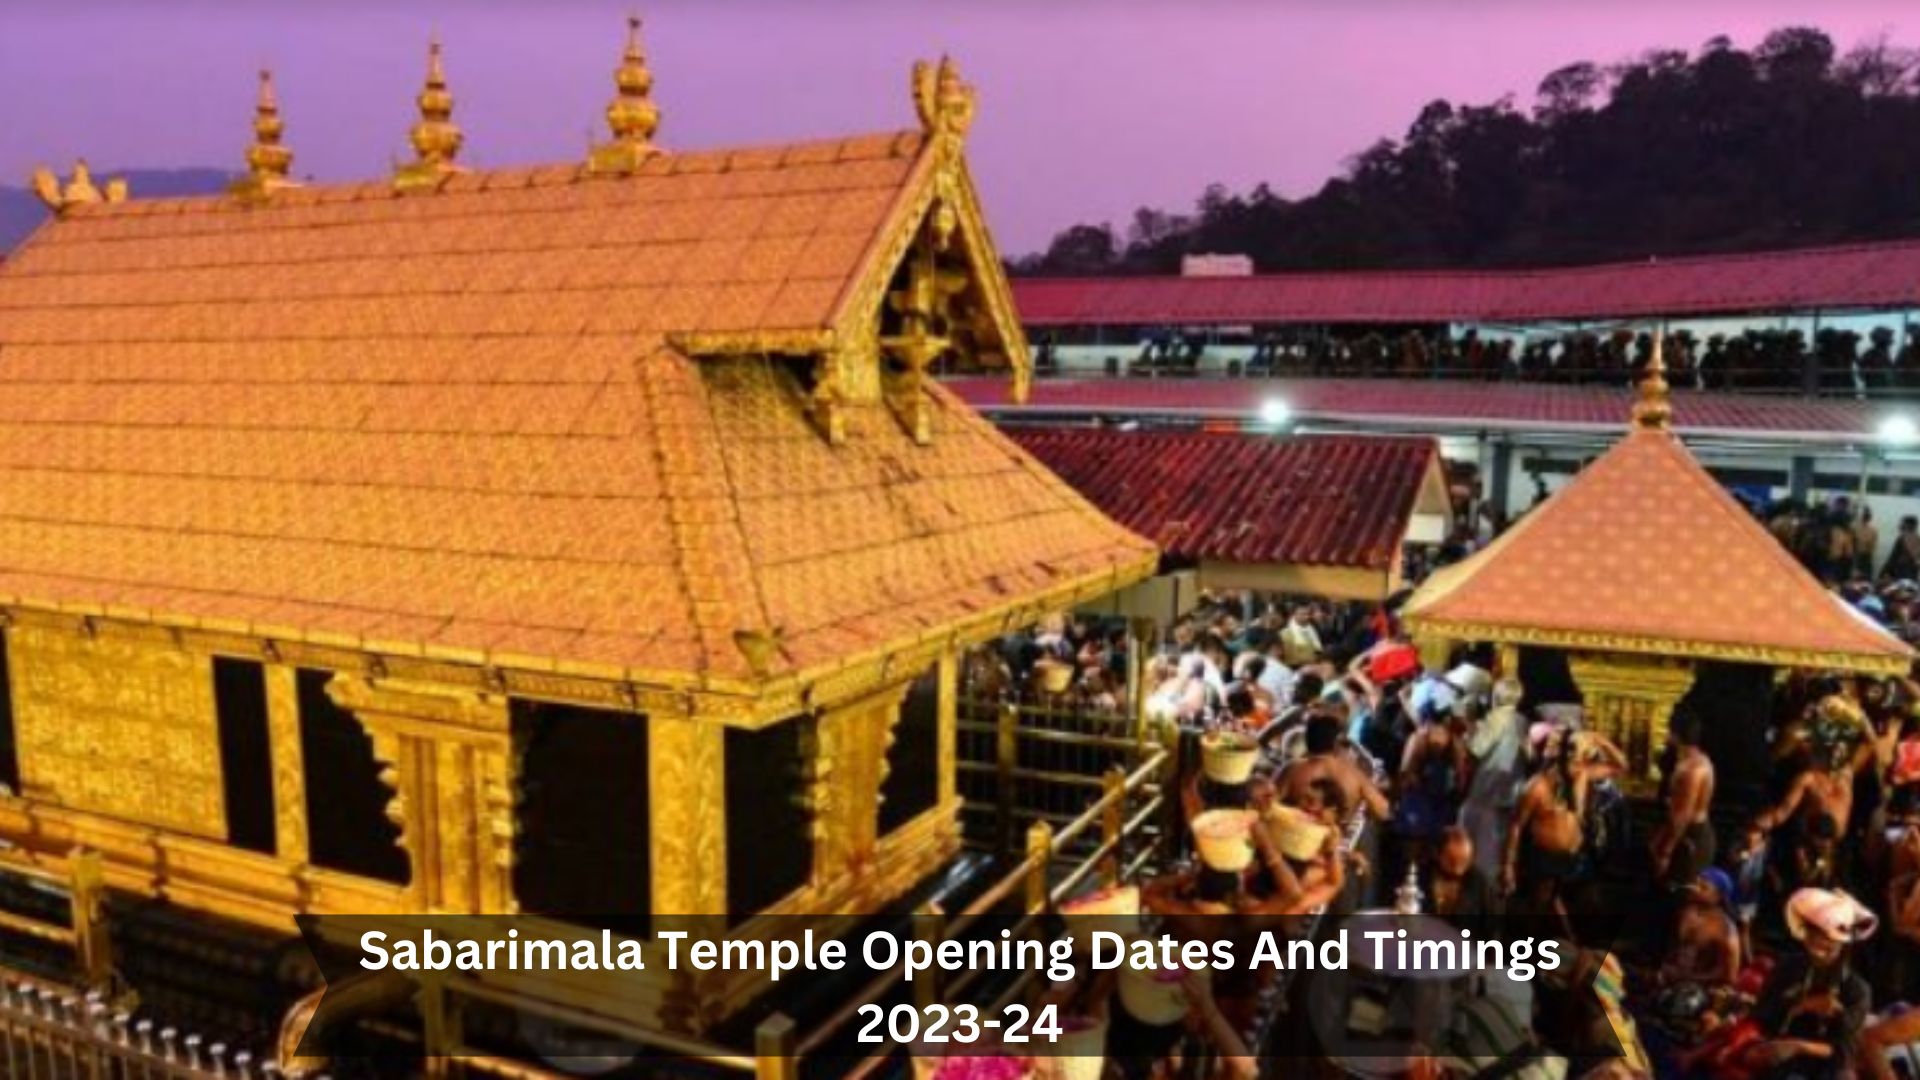 Sabarimala-Temple-Opening-Dates-And-Timings-2023-24